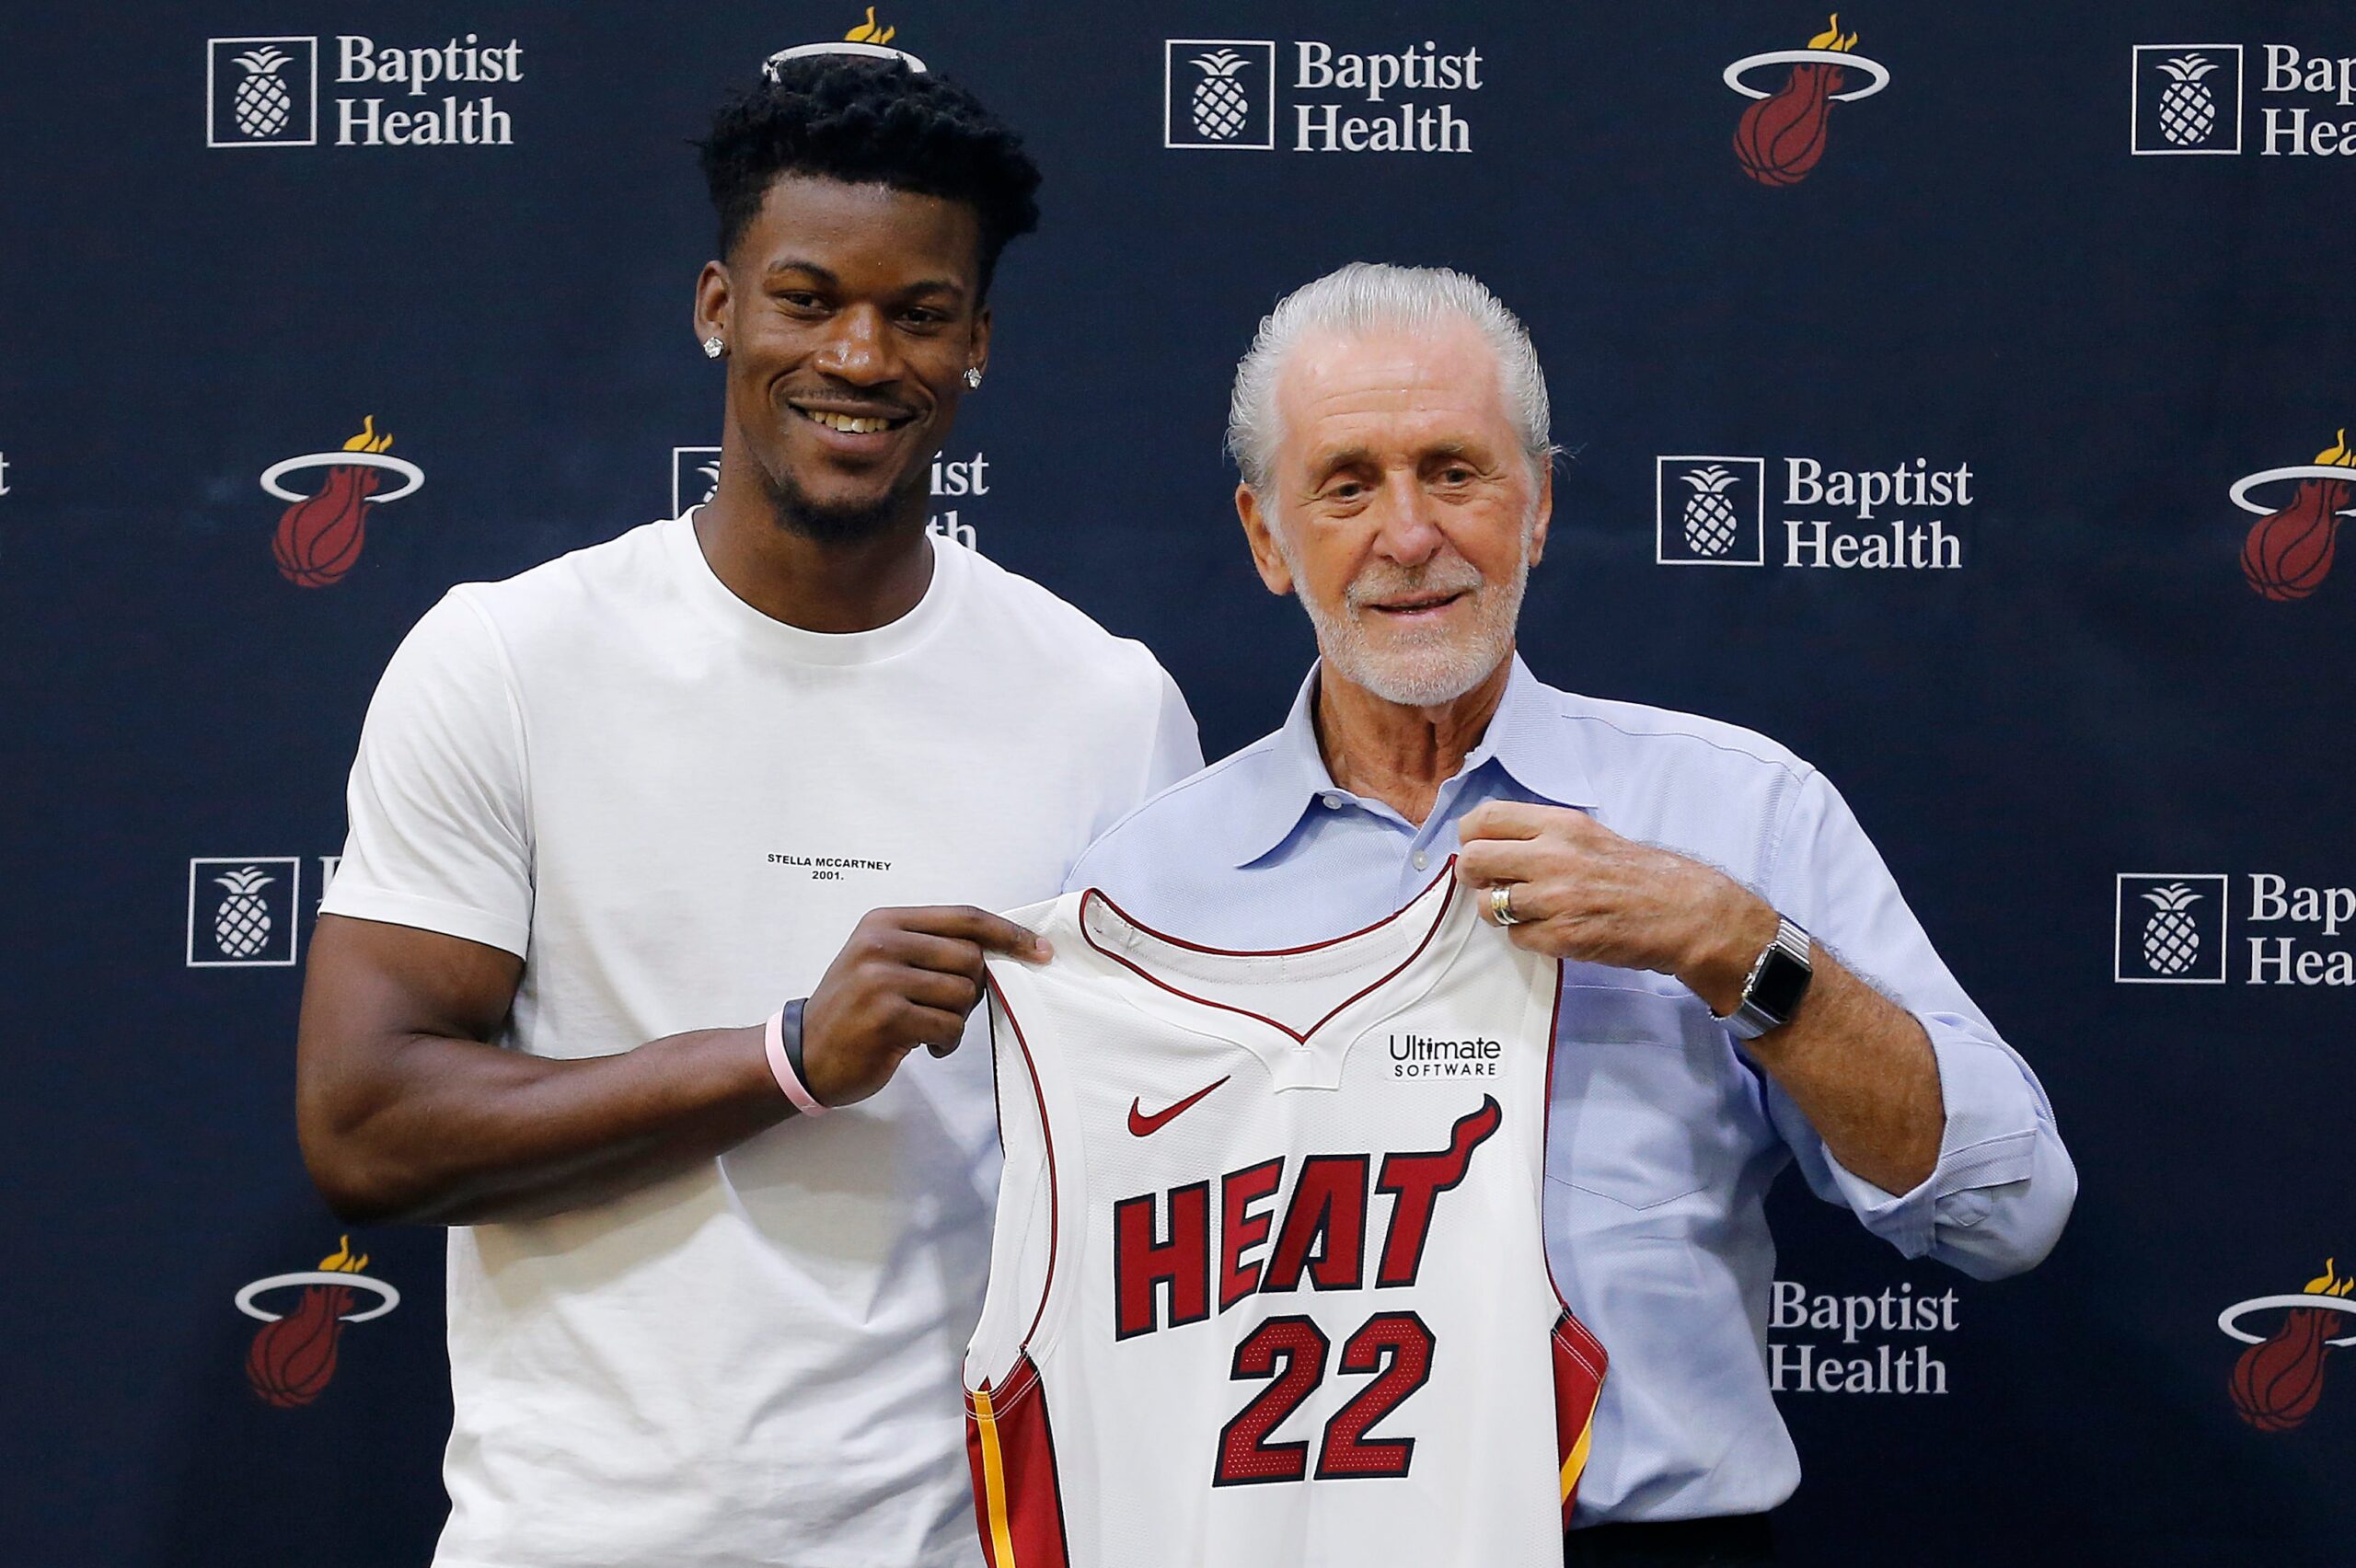 Pat Riley Blasts Jimmy Butler’s Comments About the Celtics and Knicks : “You Should Keep Your Mouth Shut”